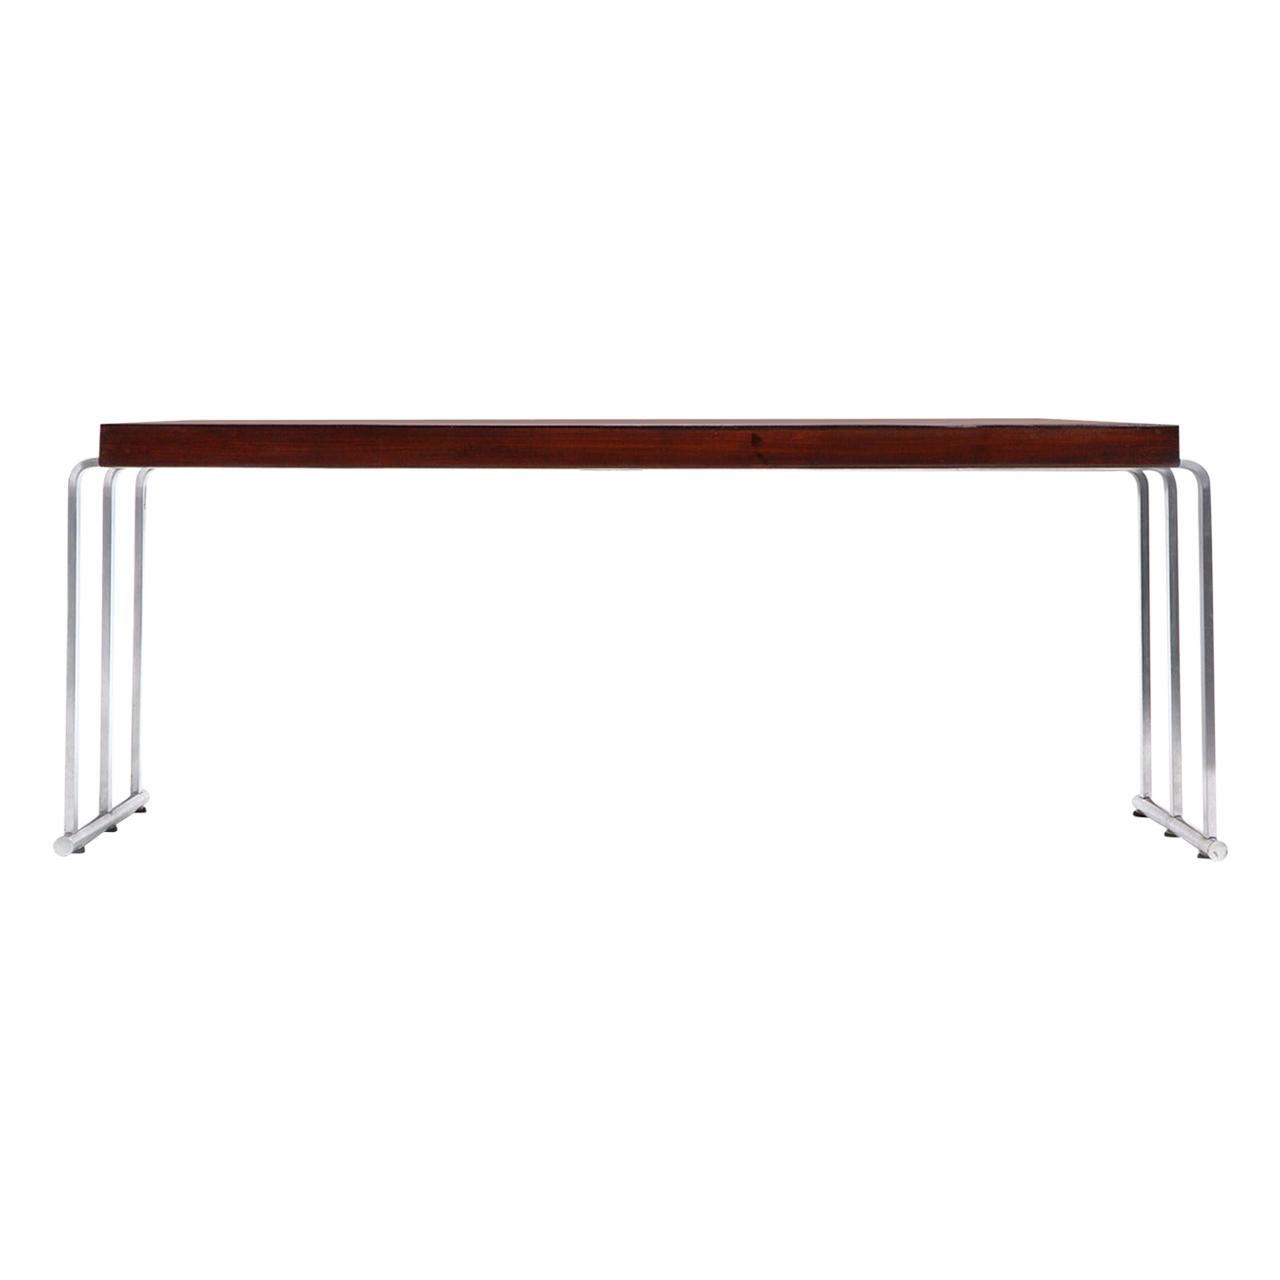 1930s Art Deco Mahogany Low Table by Gilbert Rohde for Herman Miller For Sale